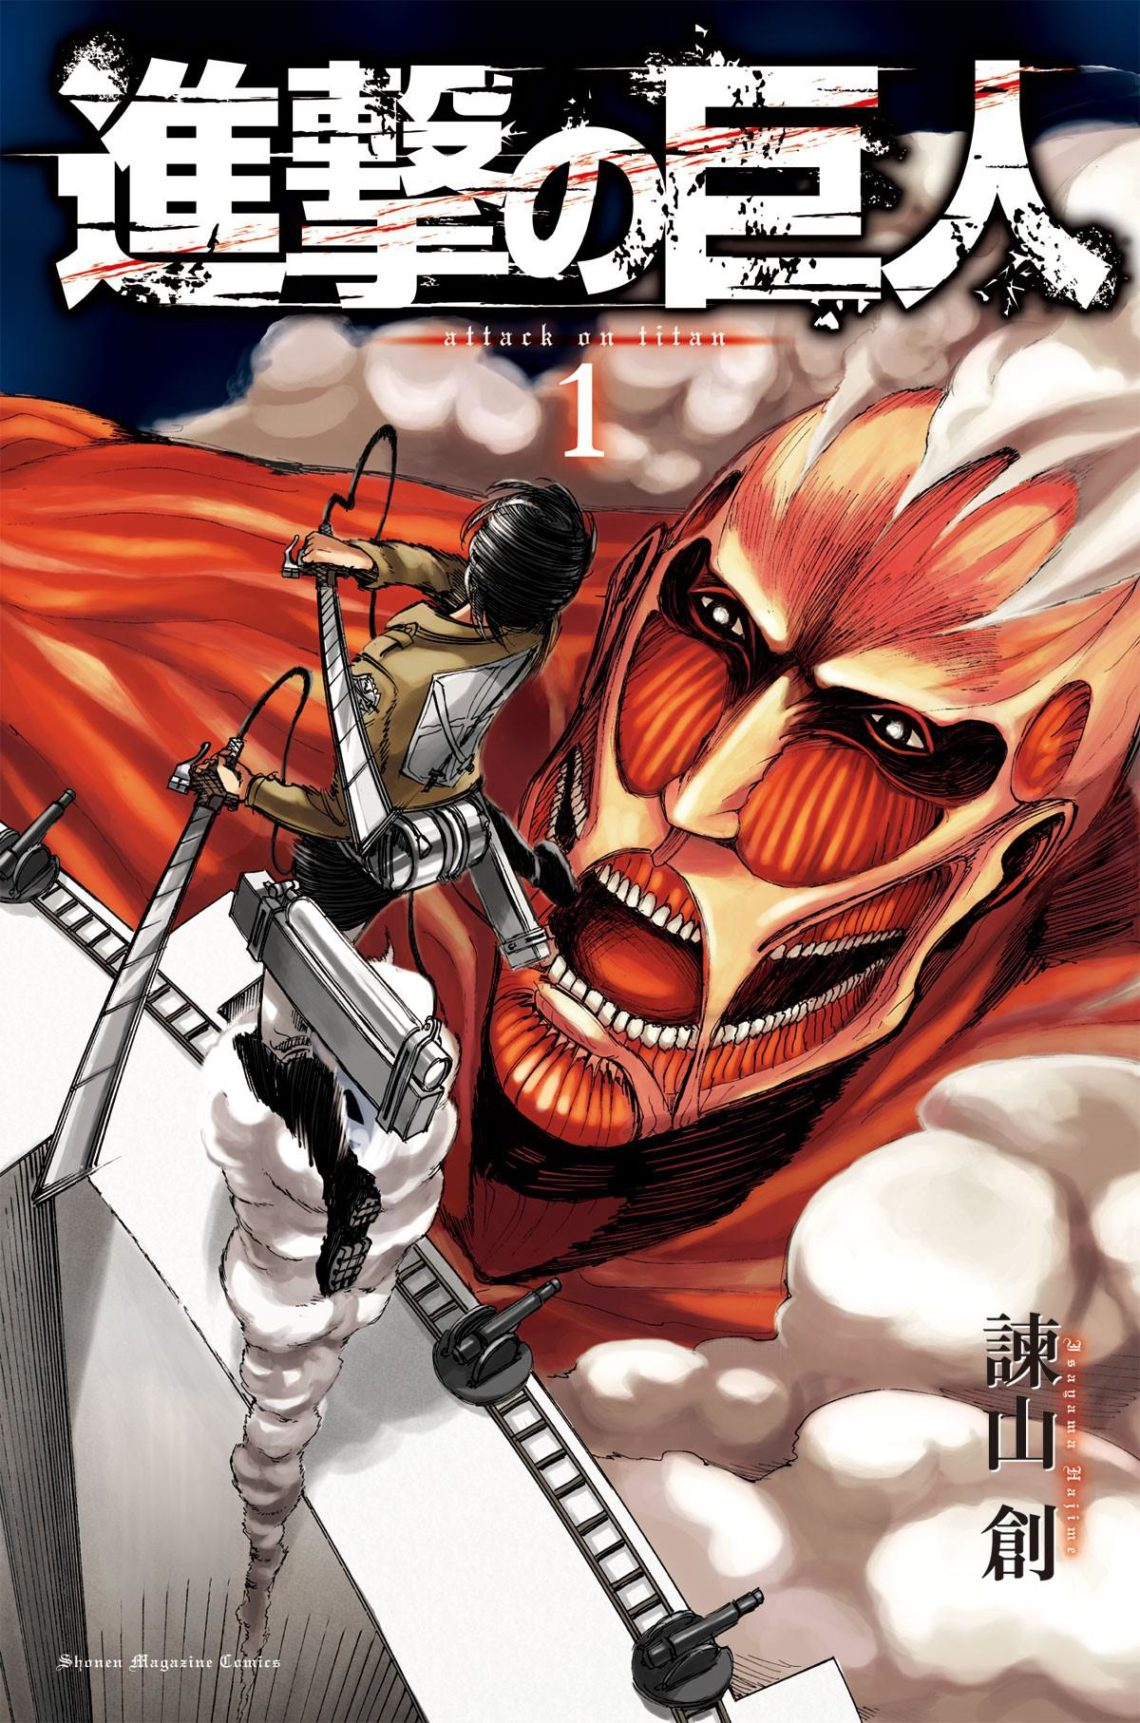 watch attack on titan english dubbed html 5 format